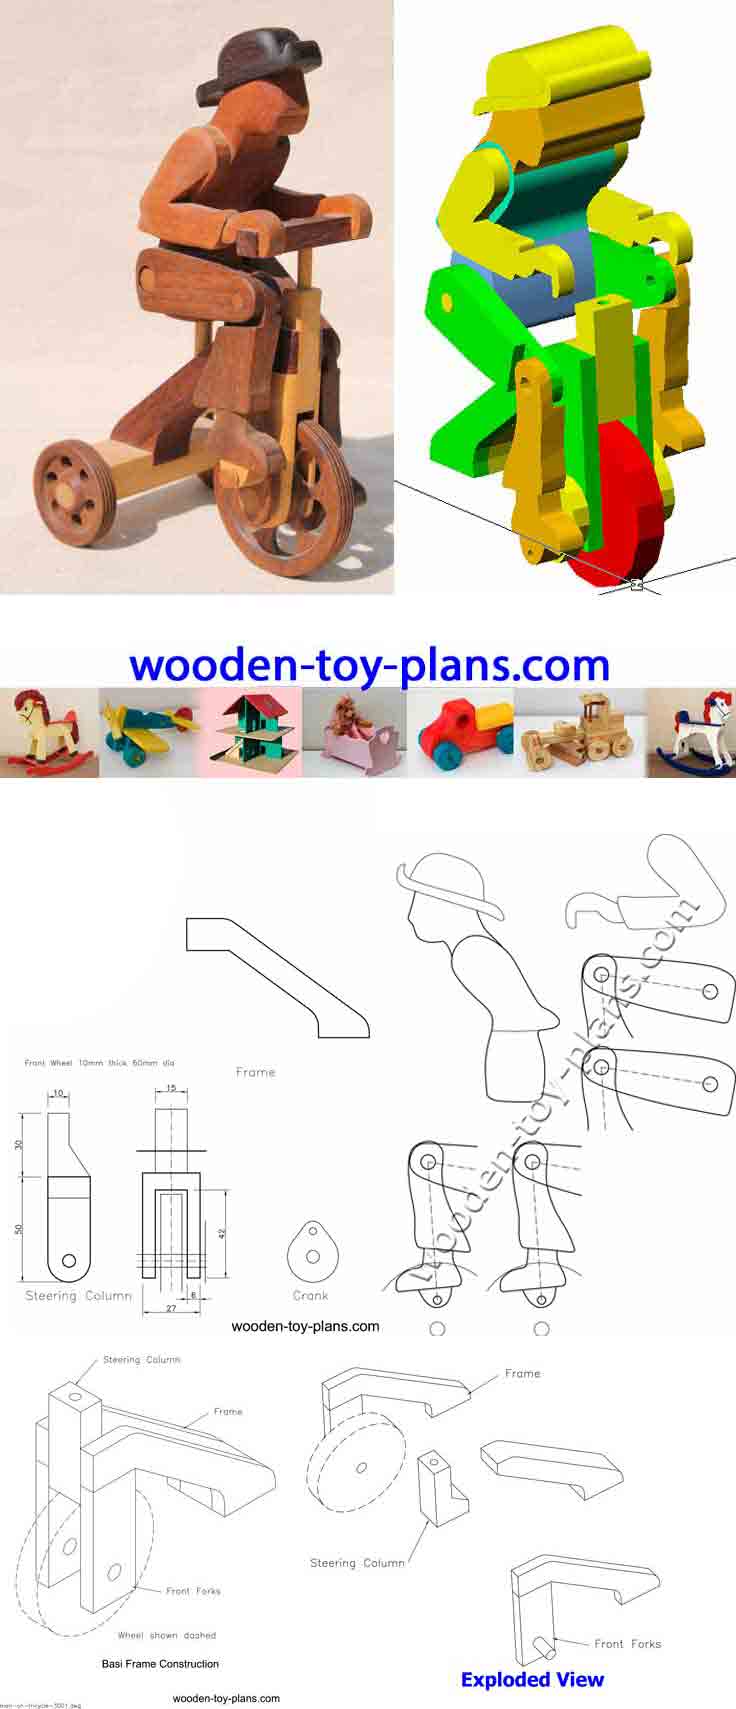 Woodworking Online Course: Create Playful Wooden Art Toys